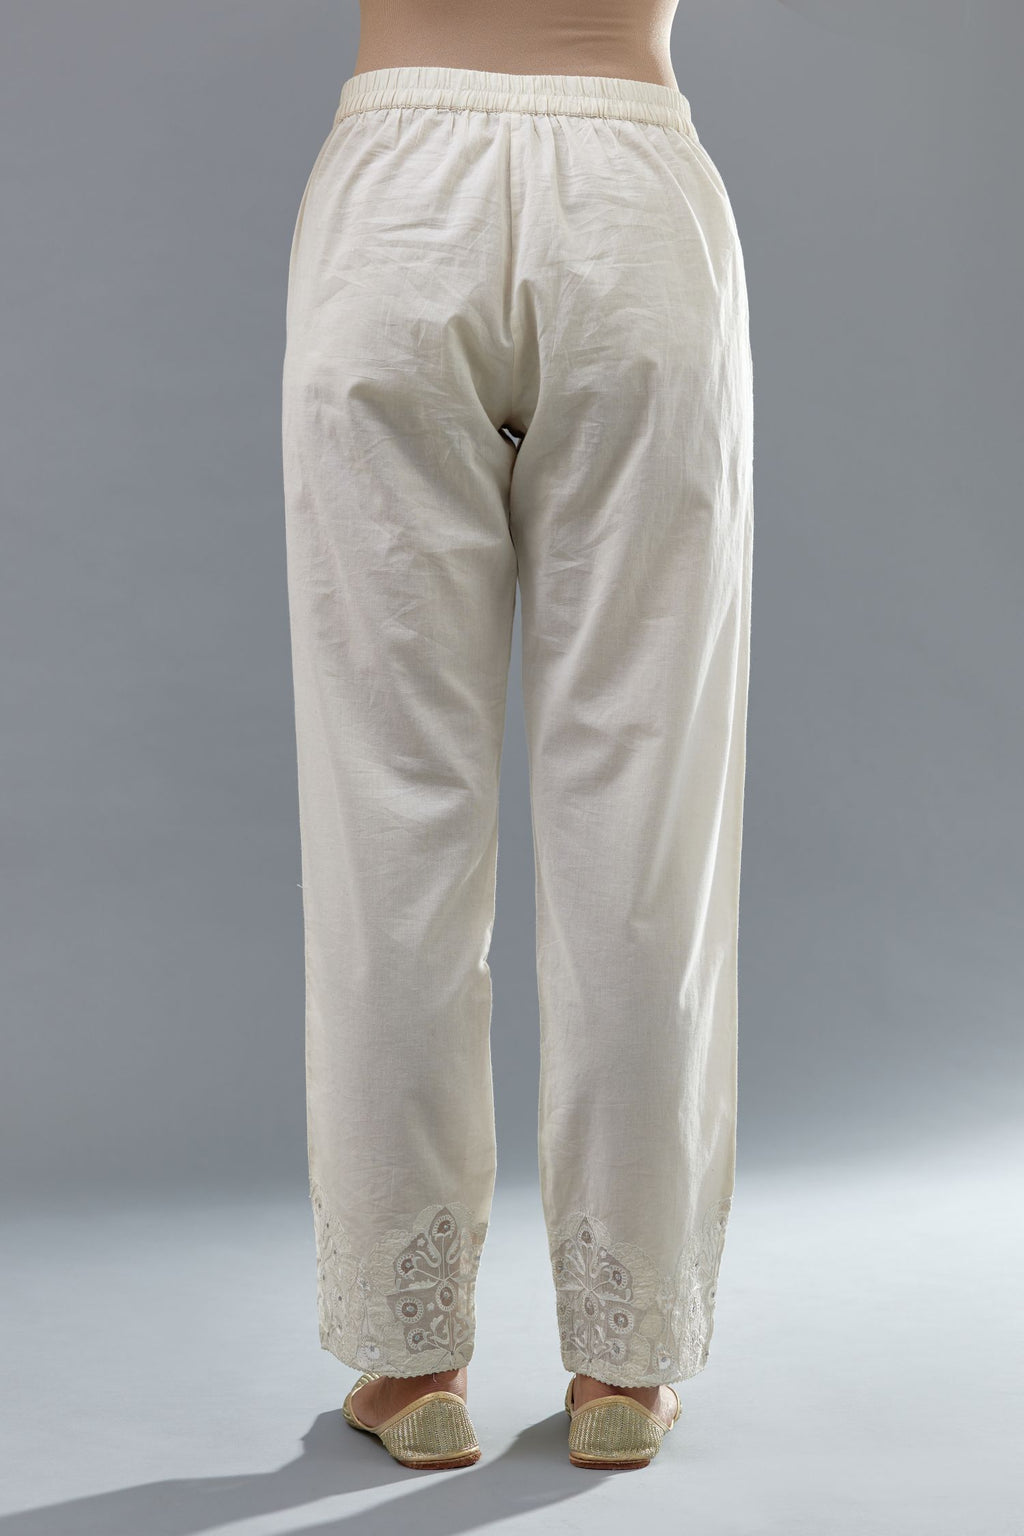 Off white cotton straight pants with appliqué and hand attached sequins detailing at bottom hem.